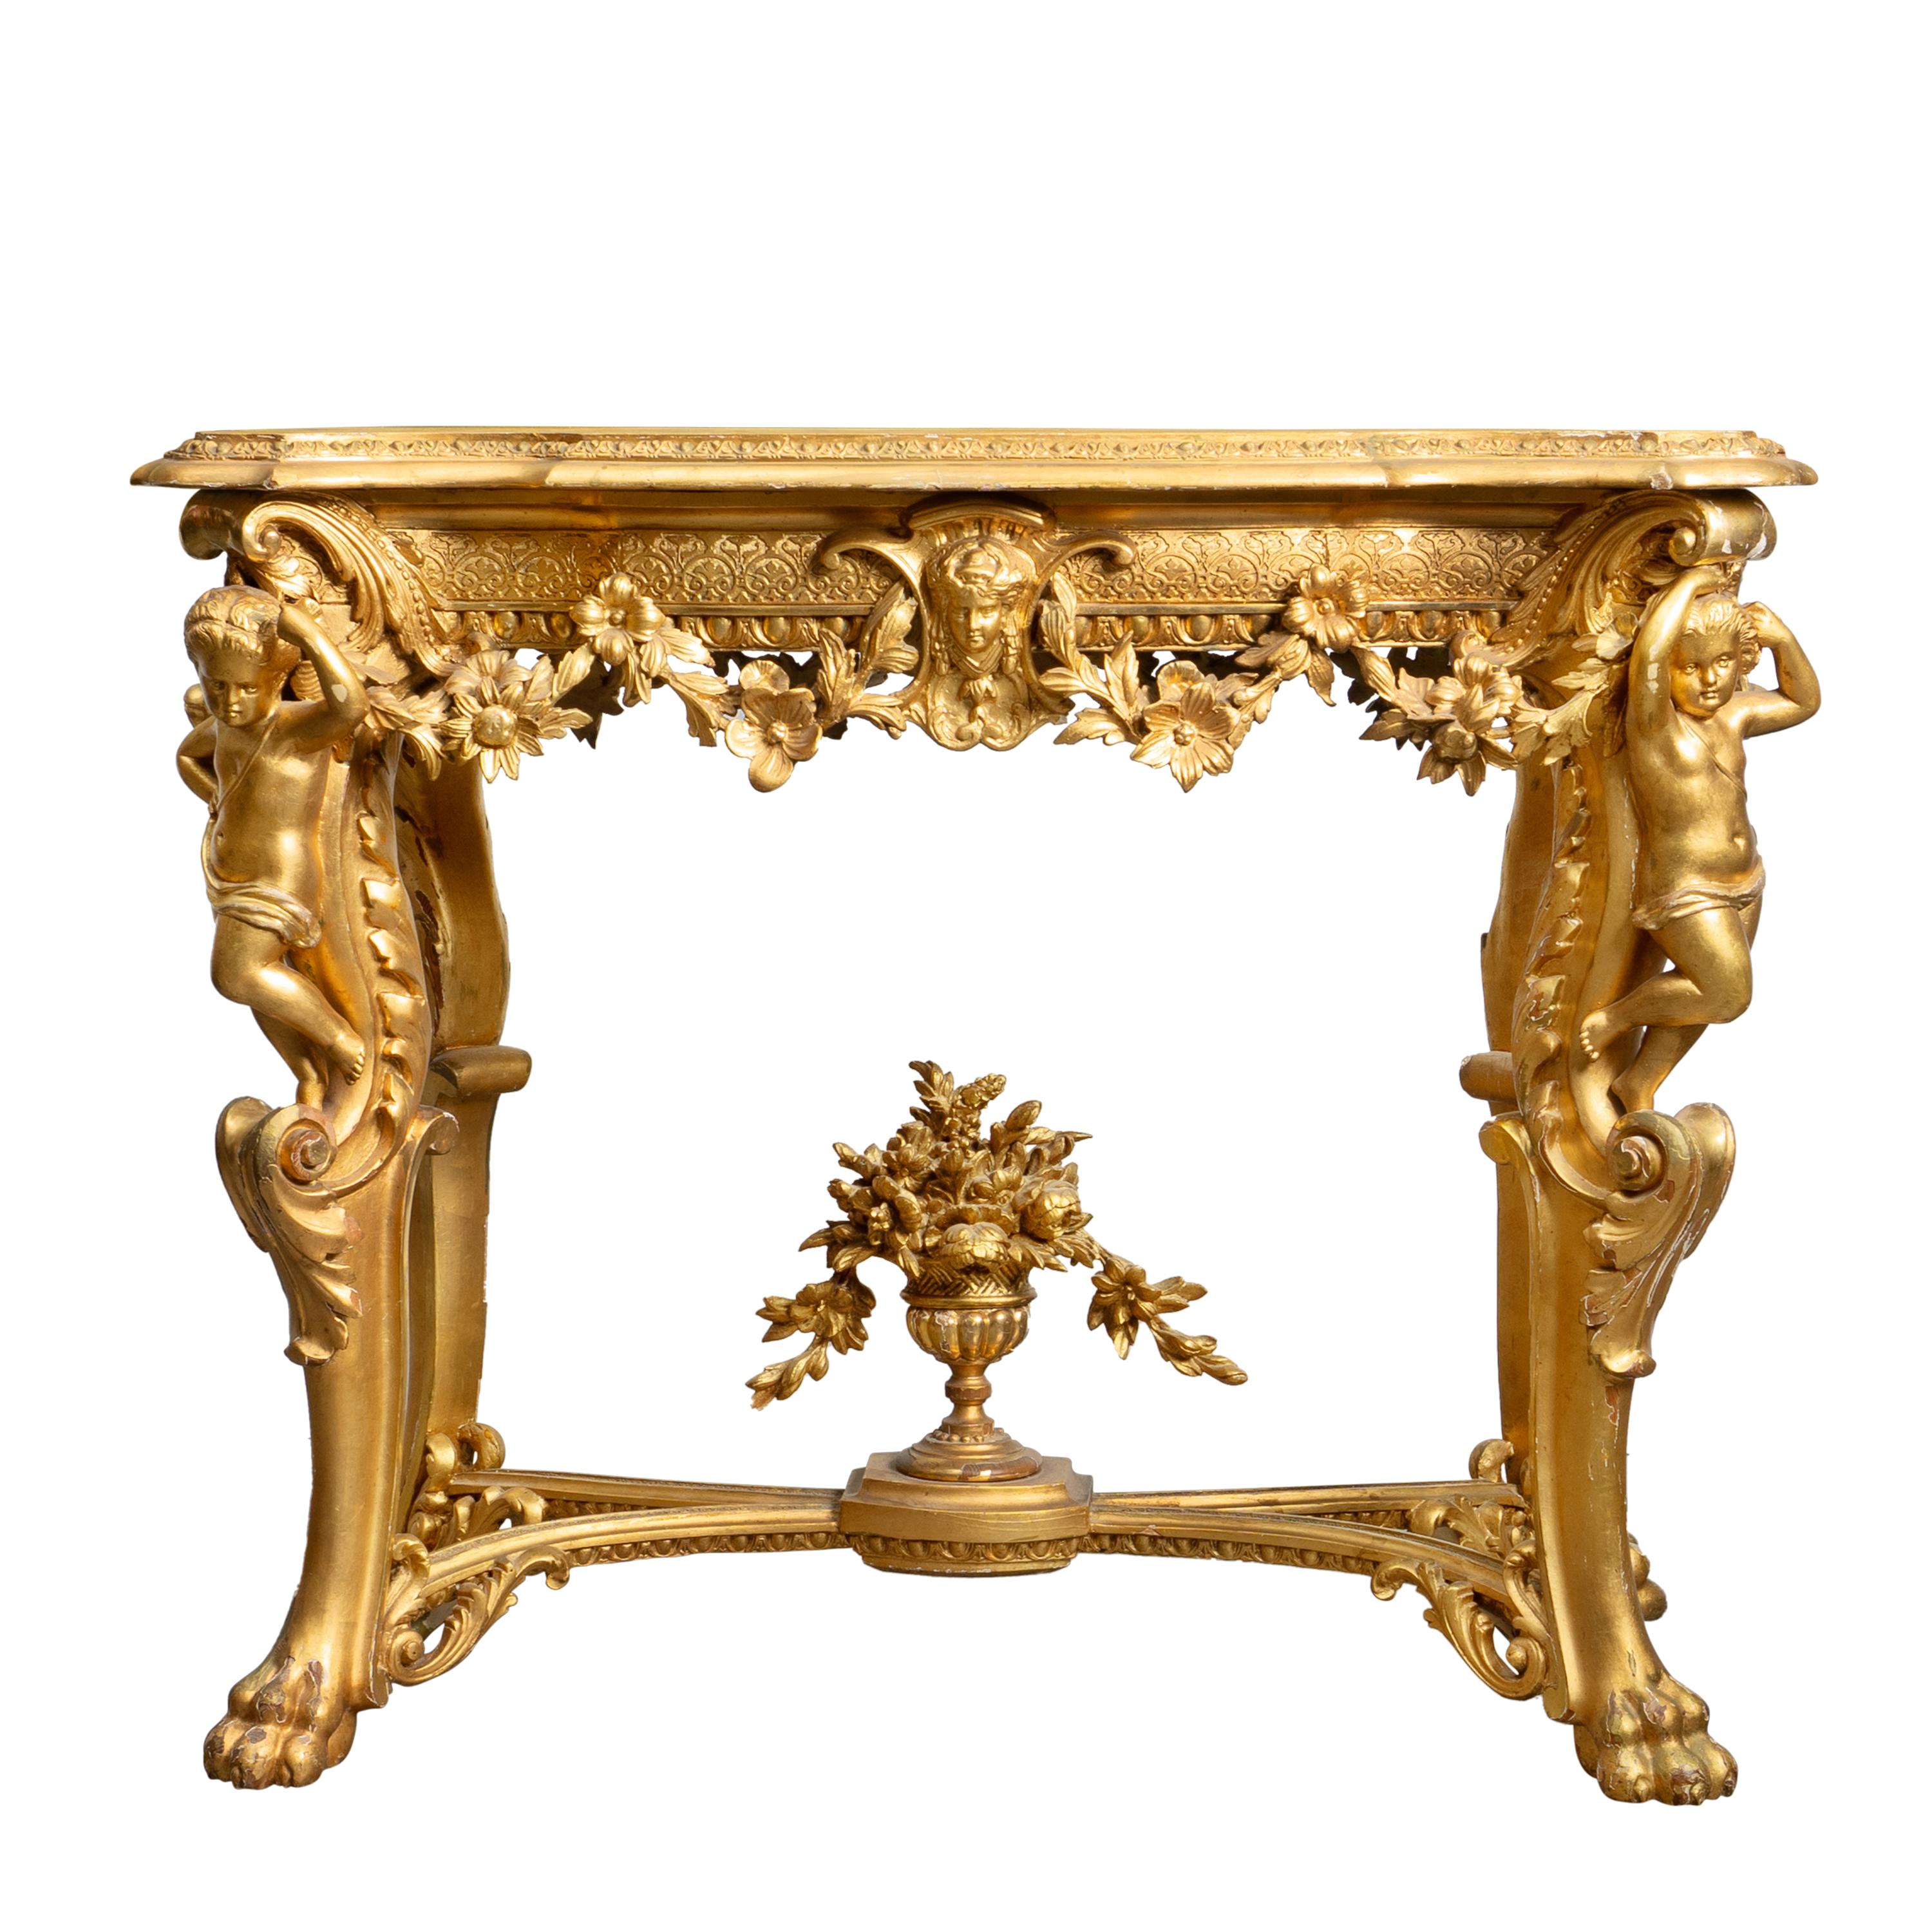 The description paints a vivid picture of an intricately crafted 19th-century French side table in the Louis XV style. The table's ornate design is a hallmark of this period, showcasing detailed craftsmanship and rich embellishments.

The table's